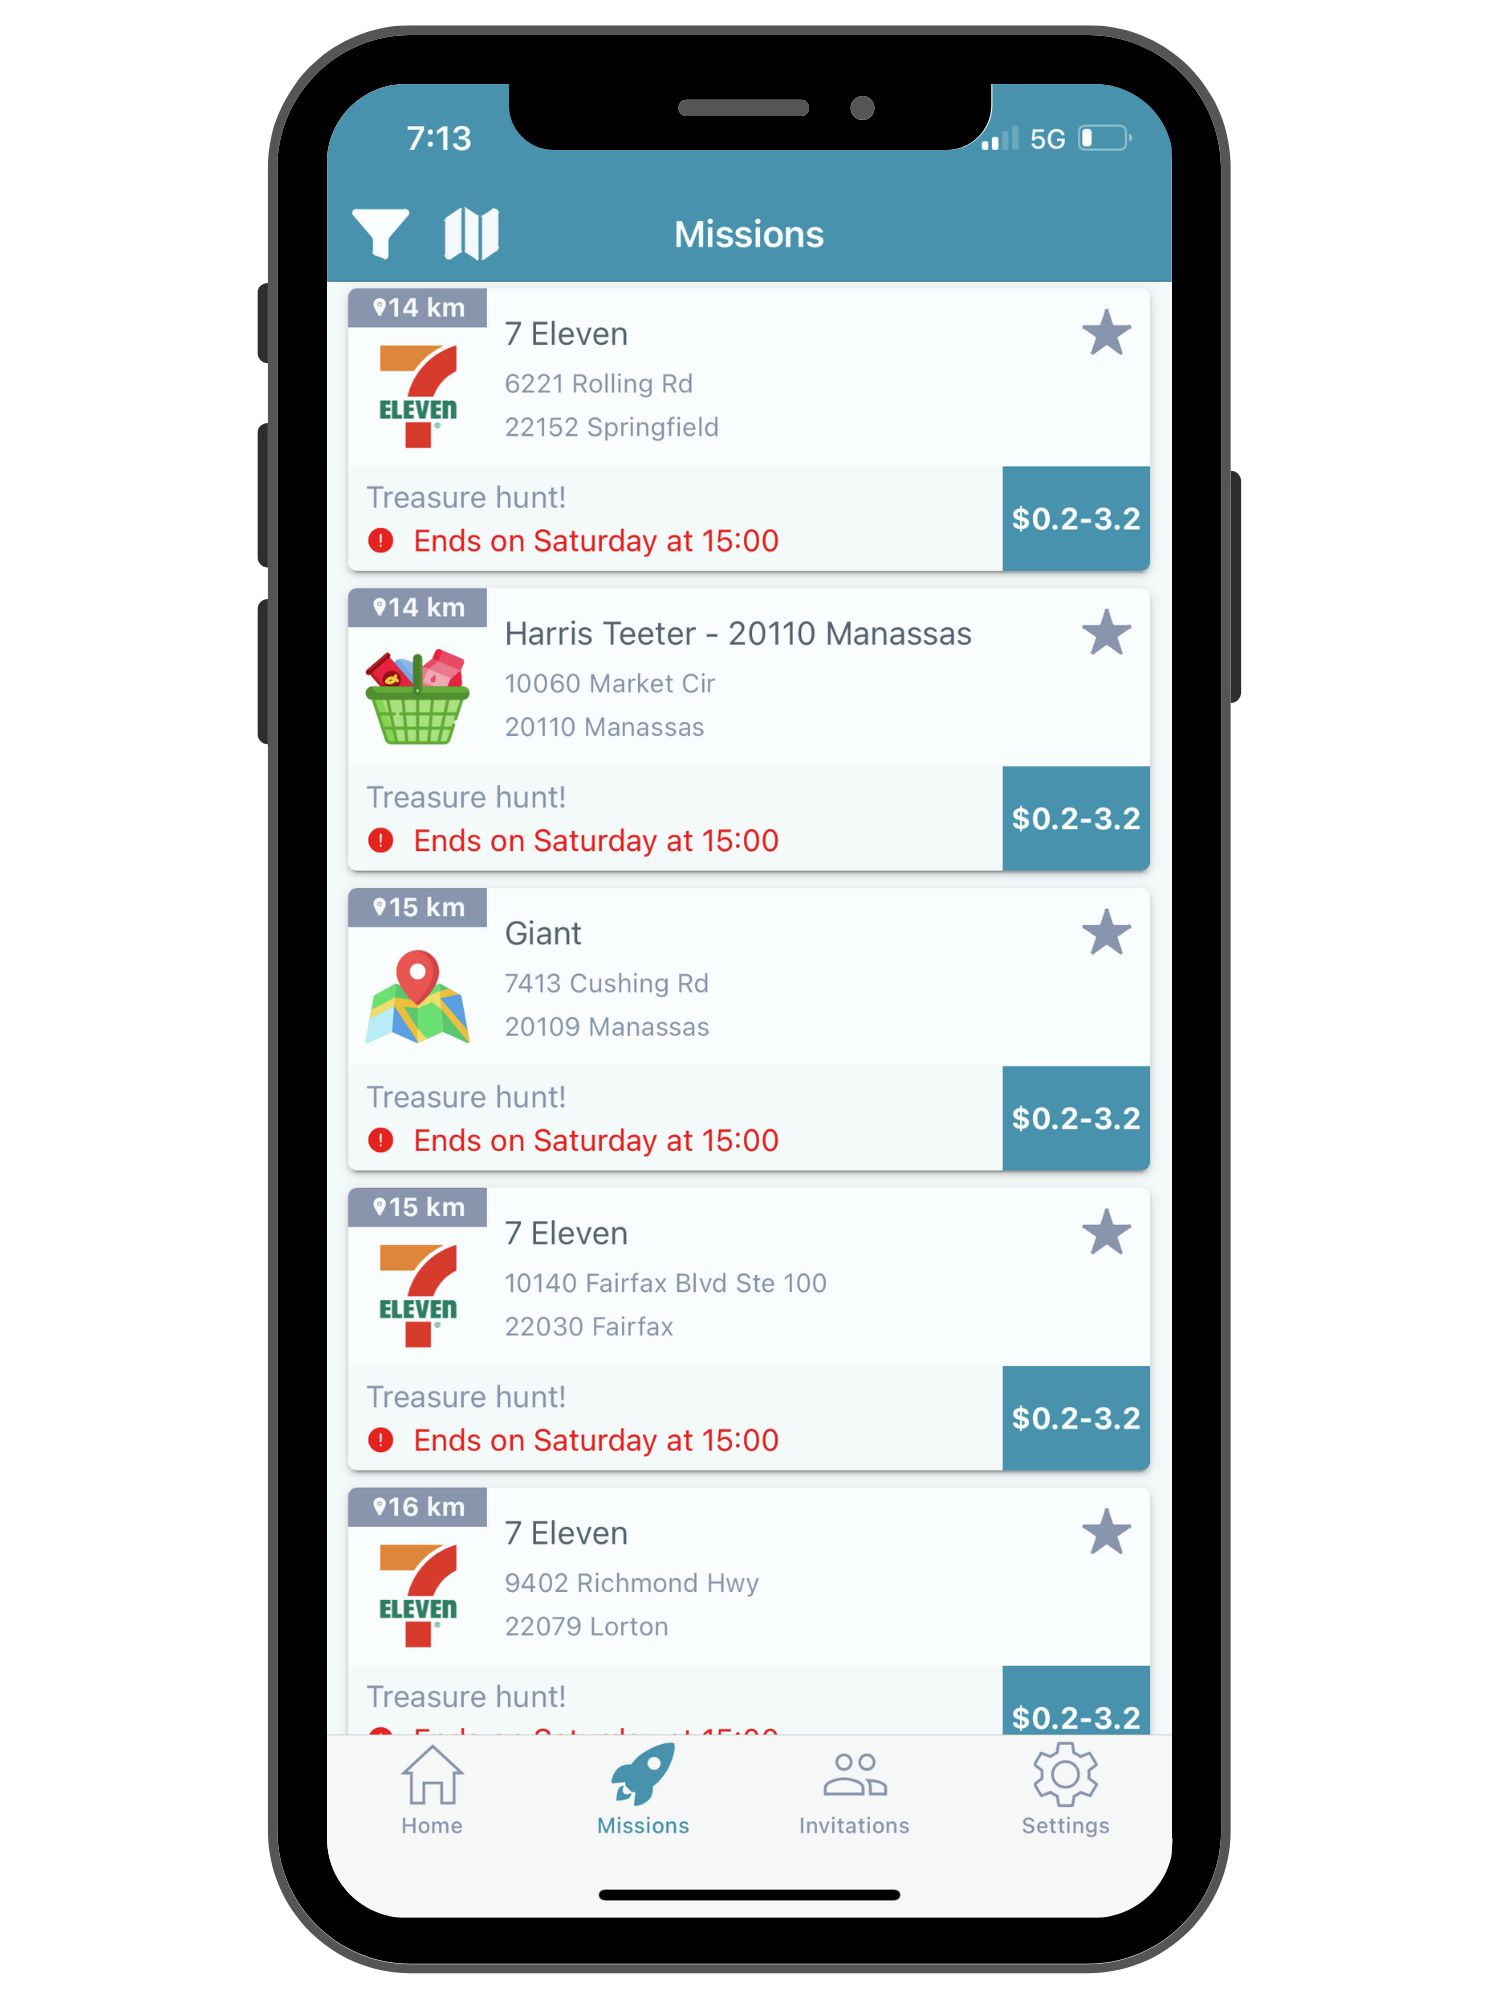 smartphone screen showing lots of missions with pay amounts for various stores